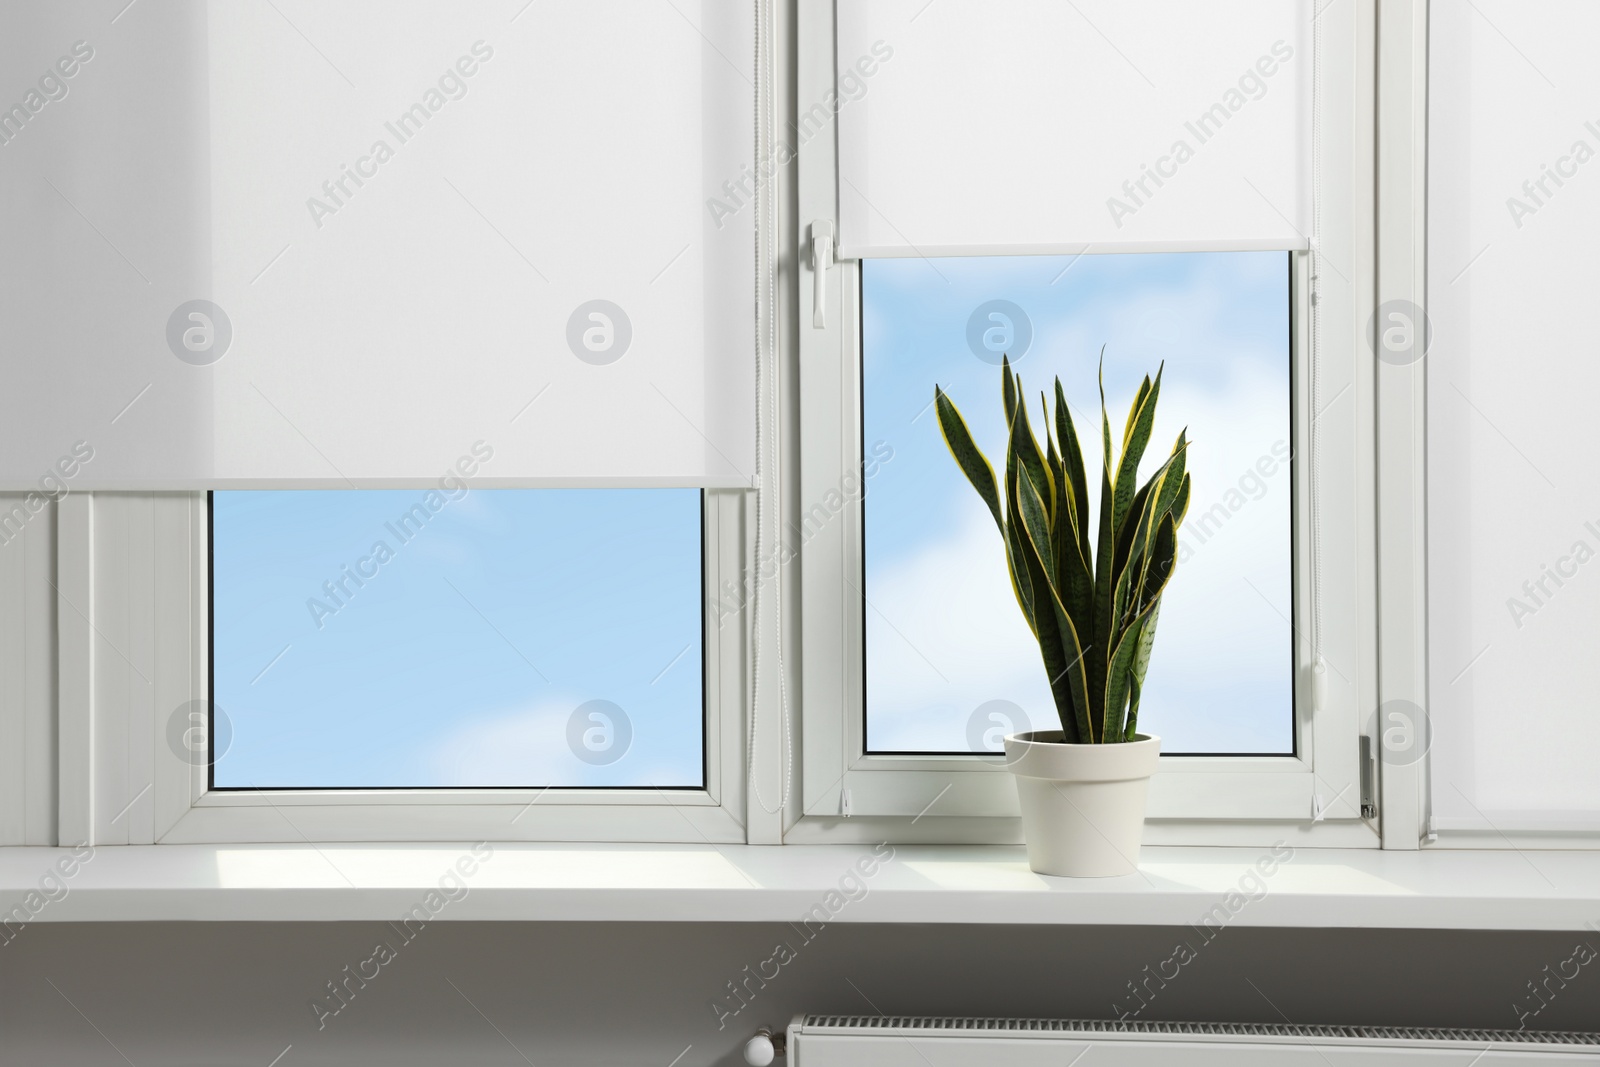 Photo of Window with blinds and potted Sansevieria plant on sill indoors